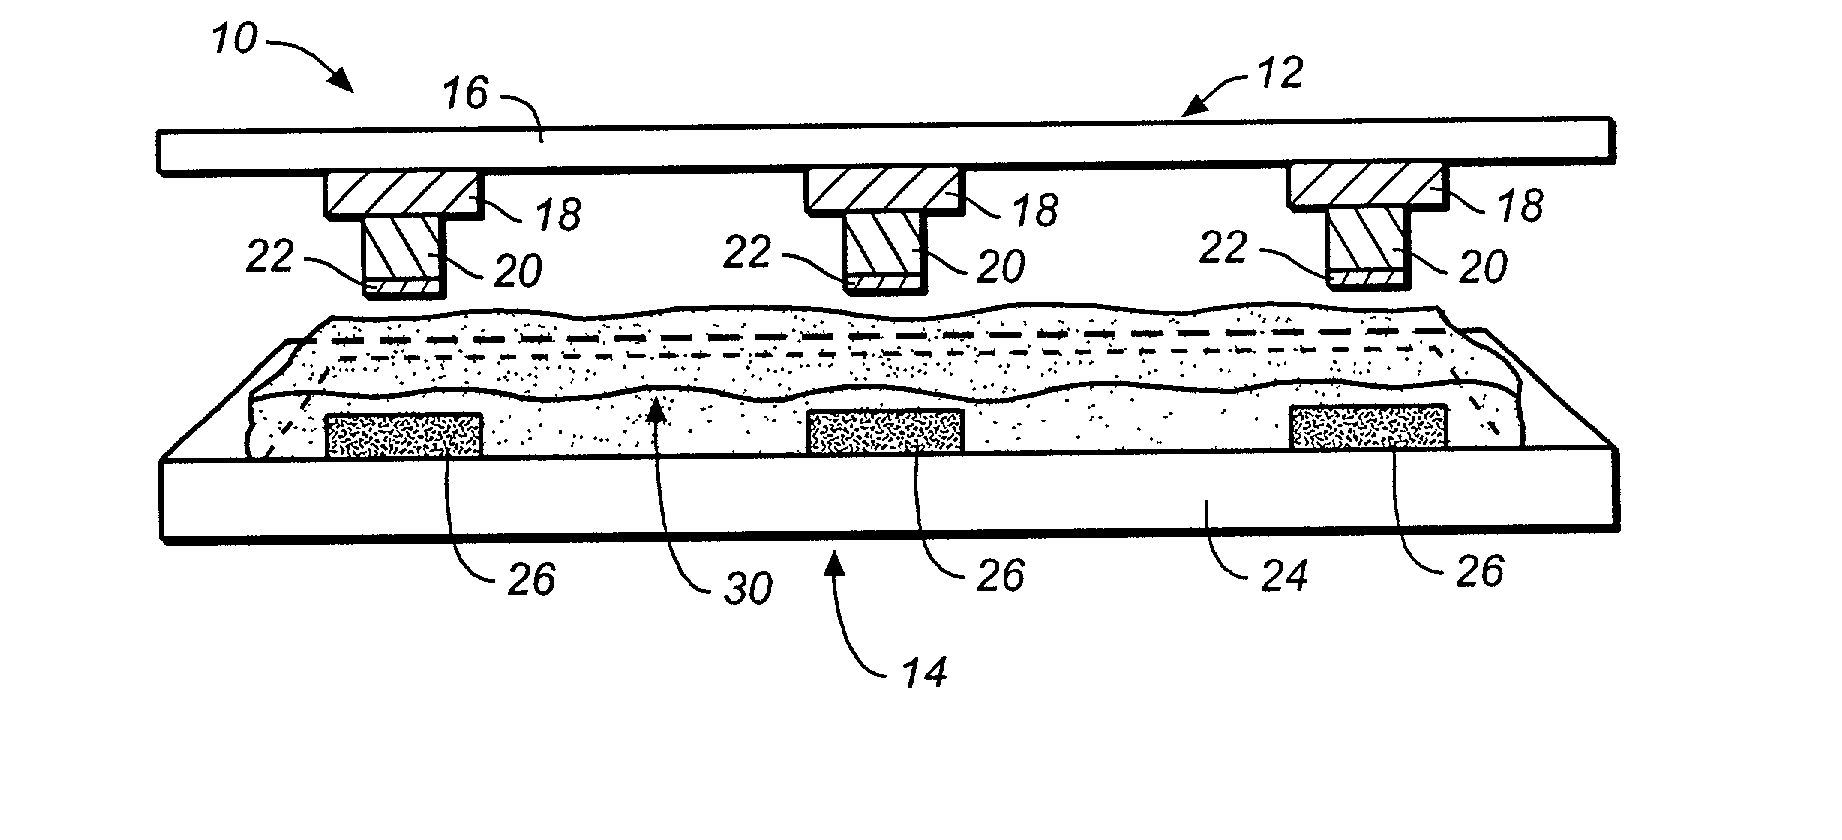 Interconnect assembly and z-connection method for fine pitch substrates